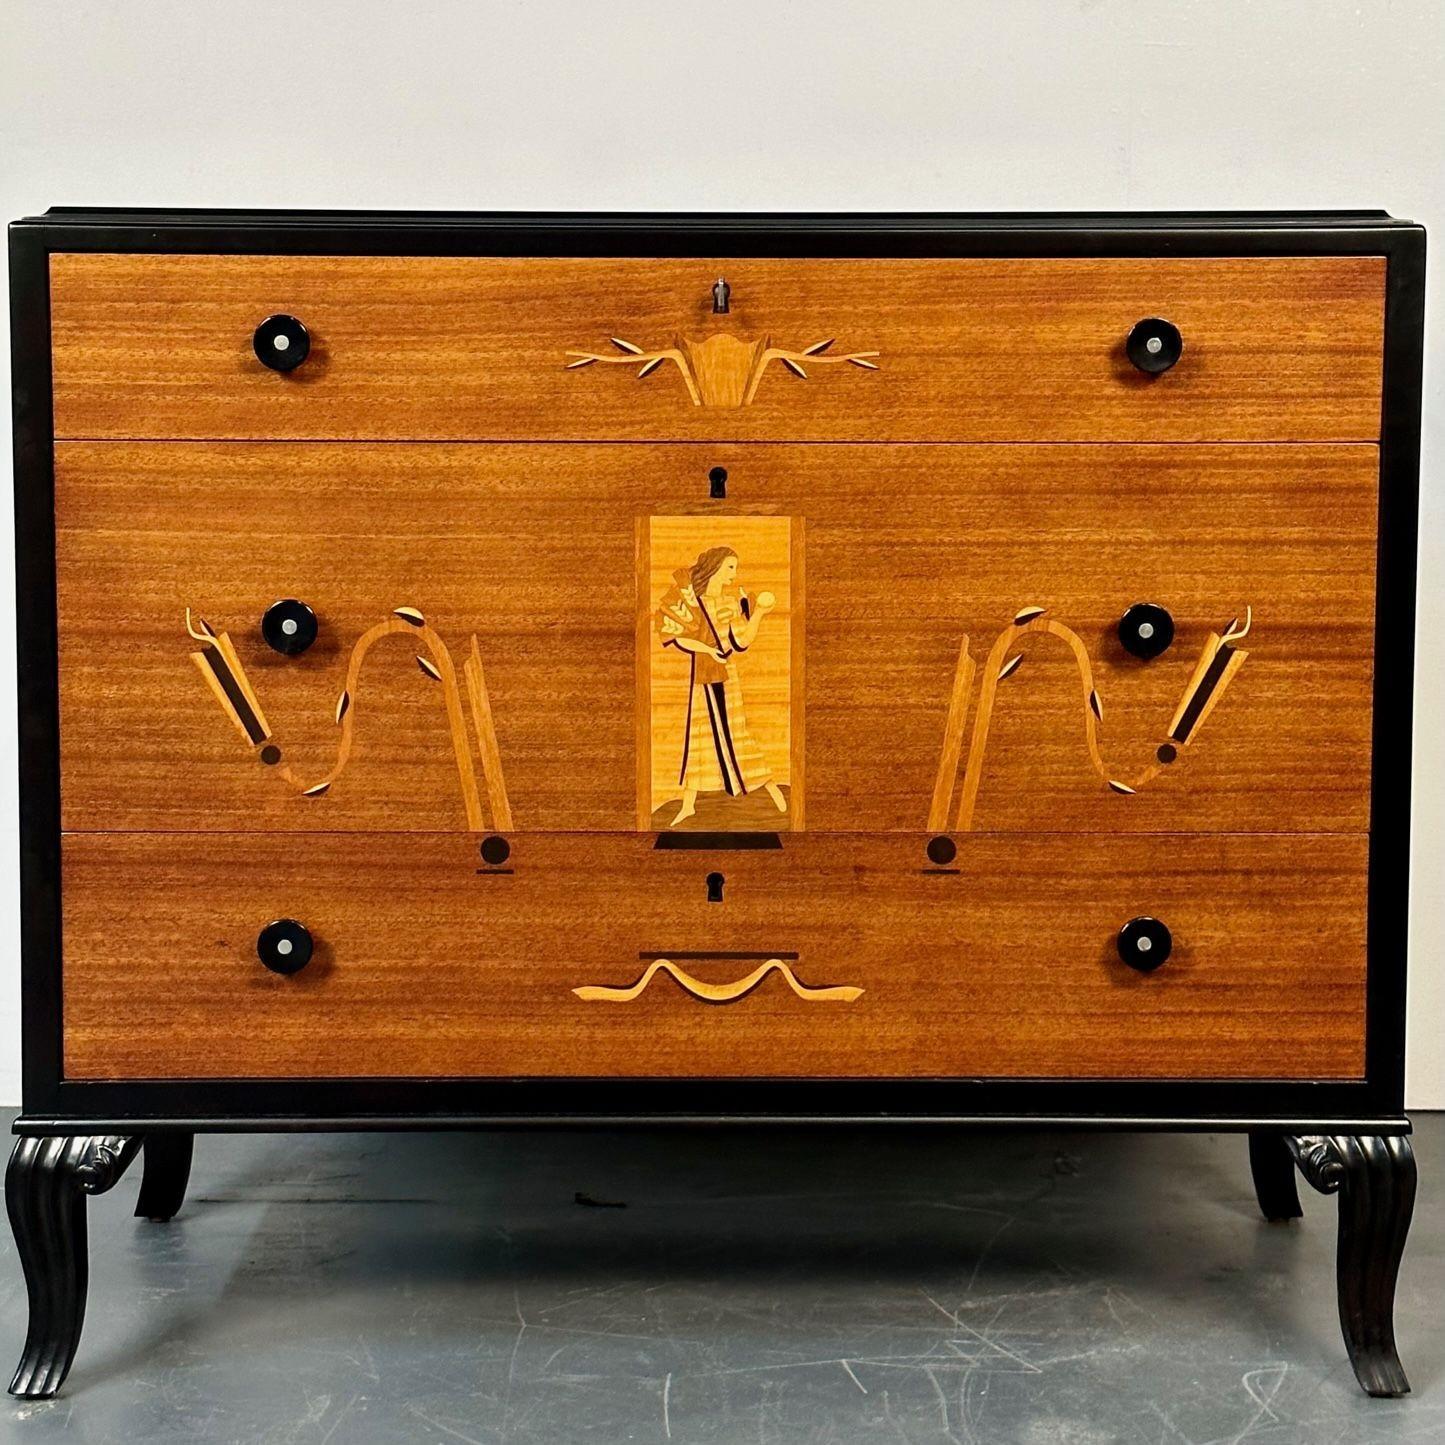 Mid-Century Modern Chest, Bedside Table, Commode, Italian, Mahogany and Ebonized
A stunning three drawer chest, commode or bedside table. Mahogany having a wonderfully inlaid figure of a servant  and decorative design on the front of an ebony framed